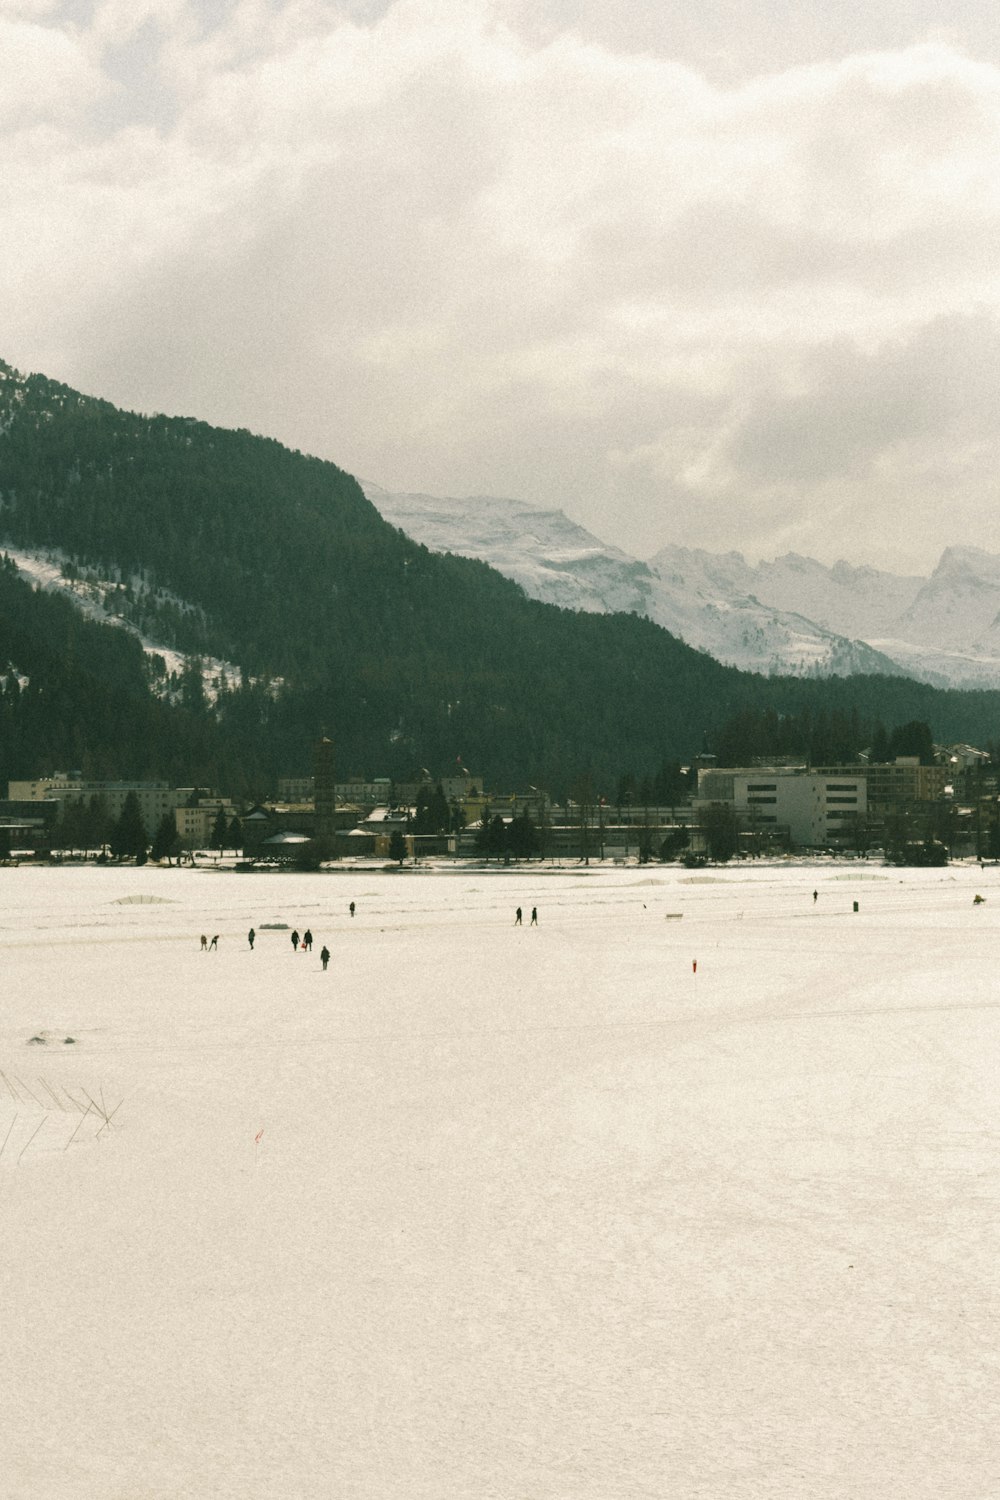 a group of people skiing across a snow covered field